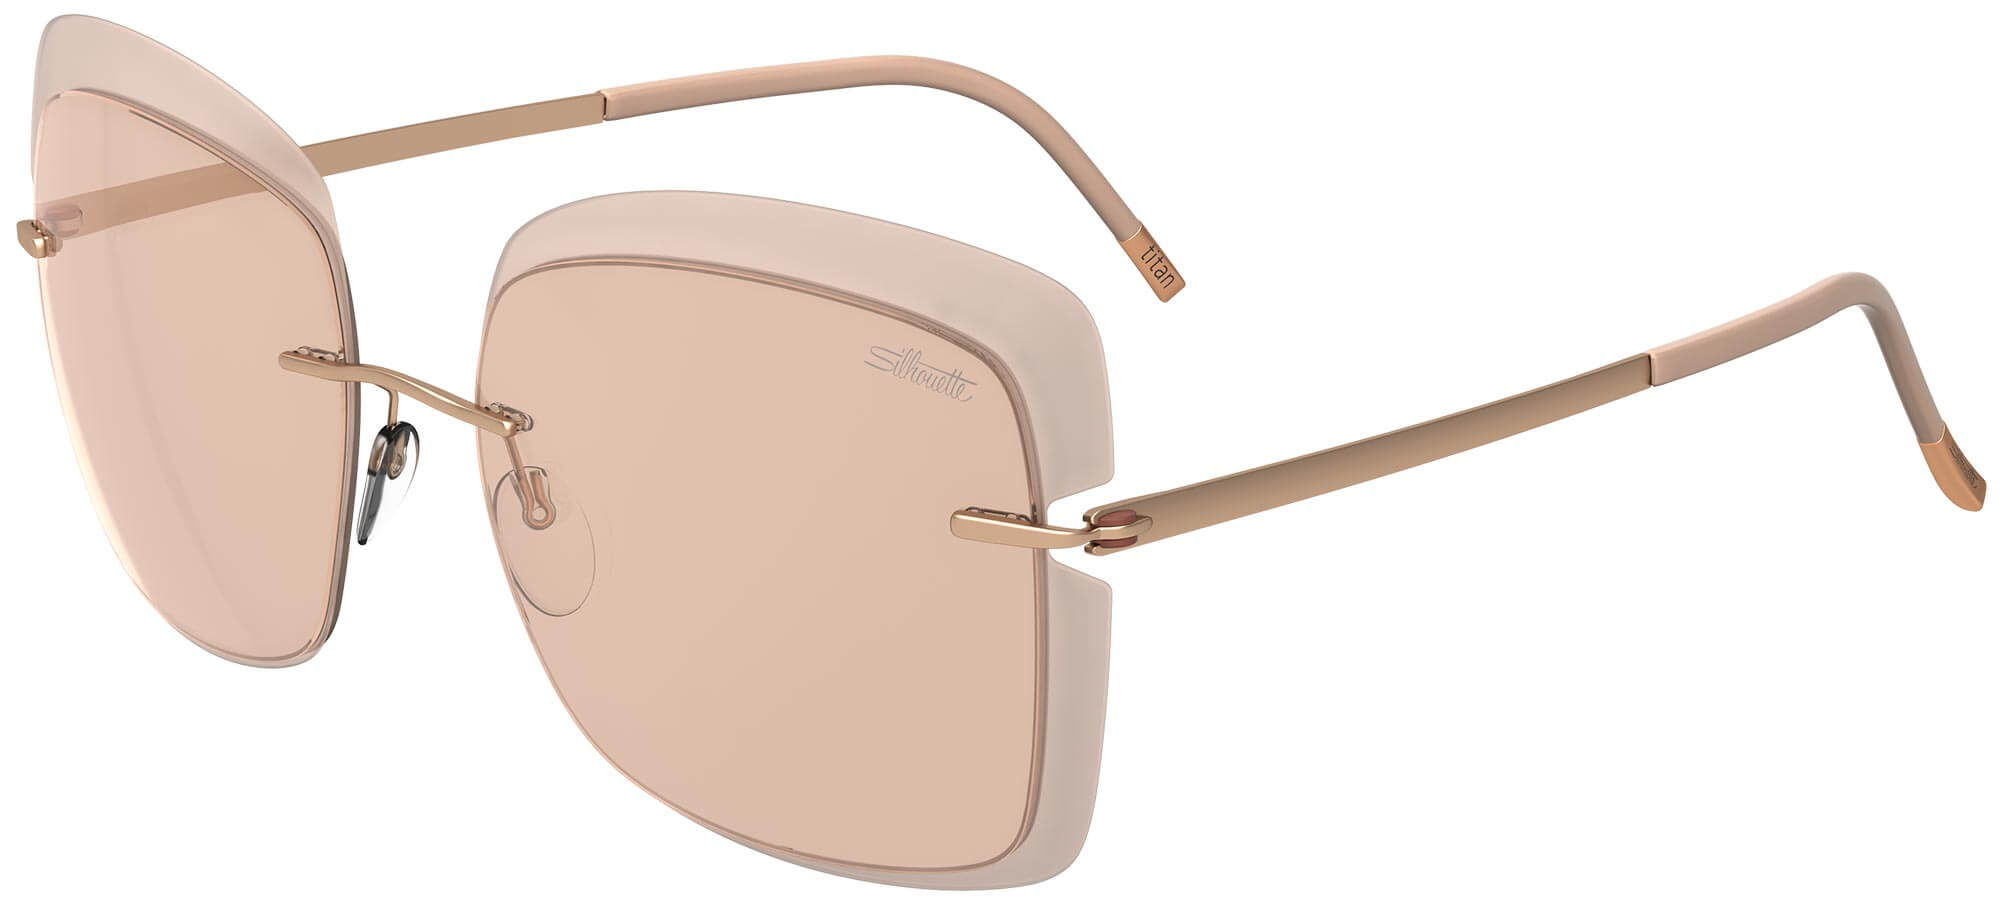 SilhouetteACCENT SHADES 8165Rose Gold/pink Grey (3530)